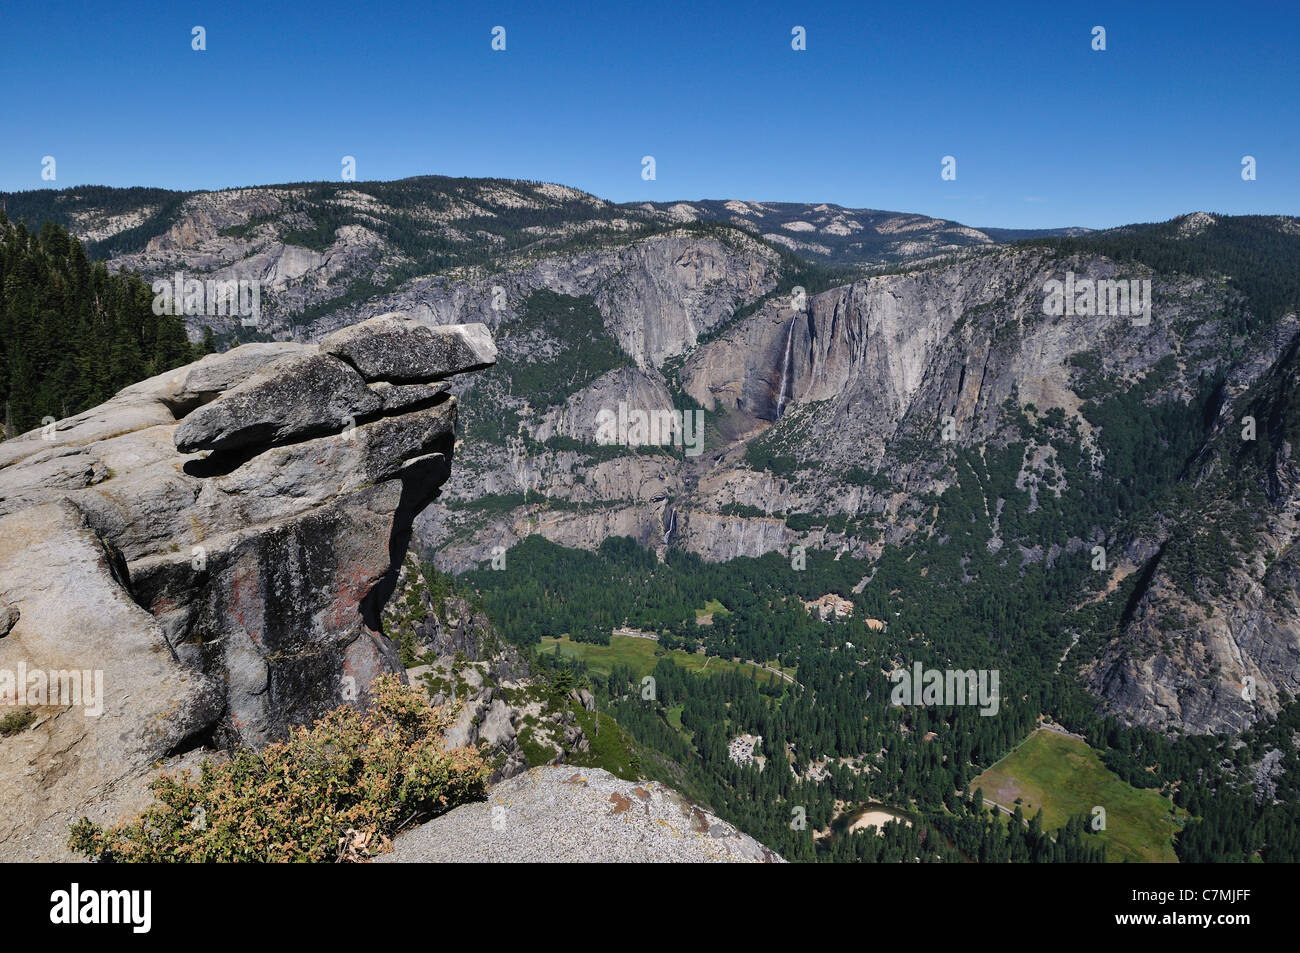 View of Yosemite Valley from the Glacier Point. Yosemite National Park, California, USA. Stock Photo